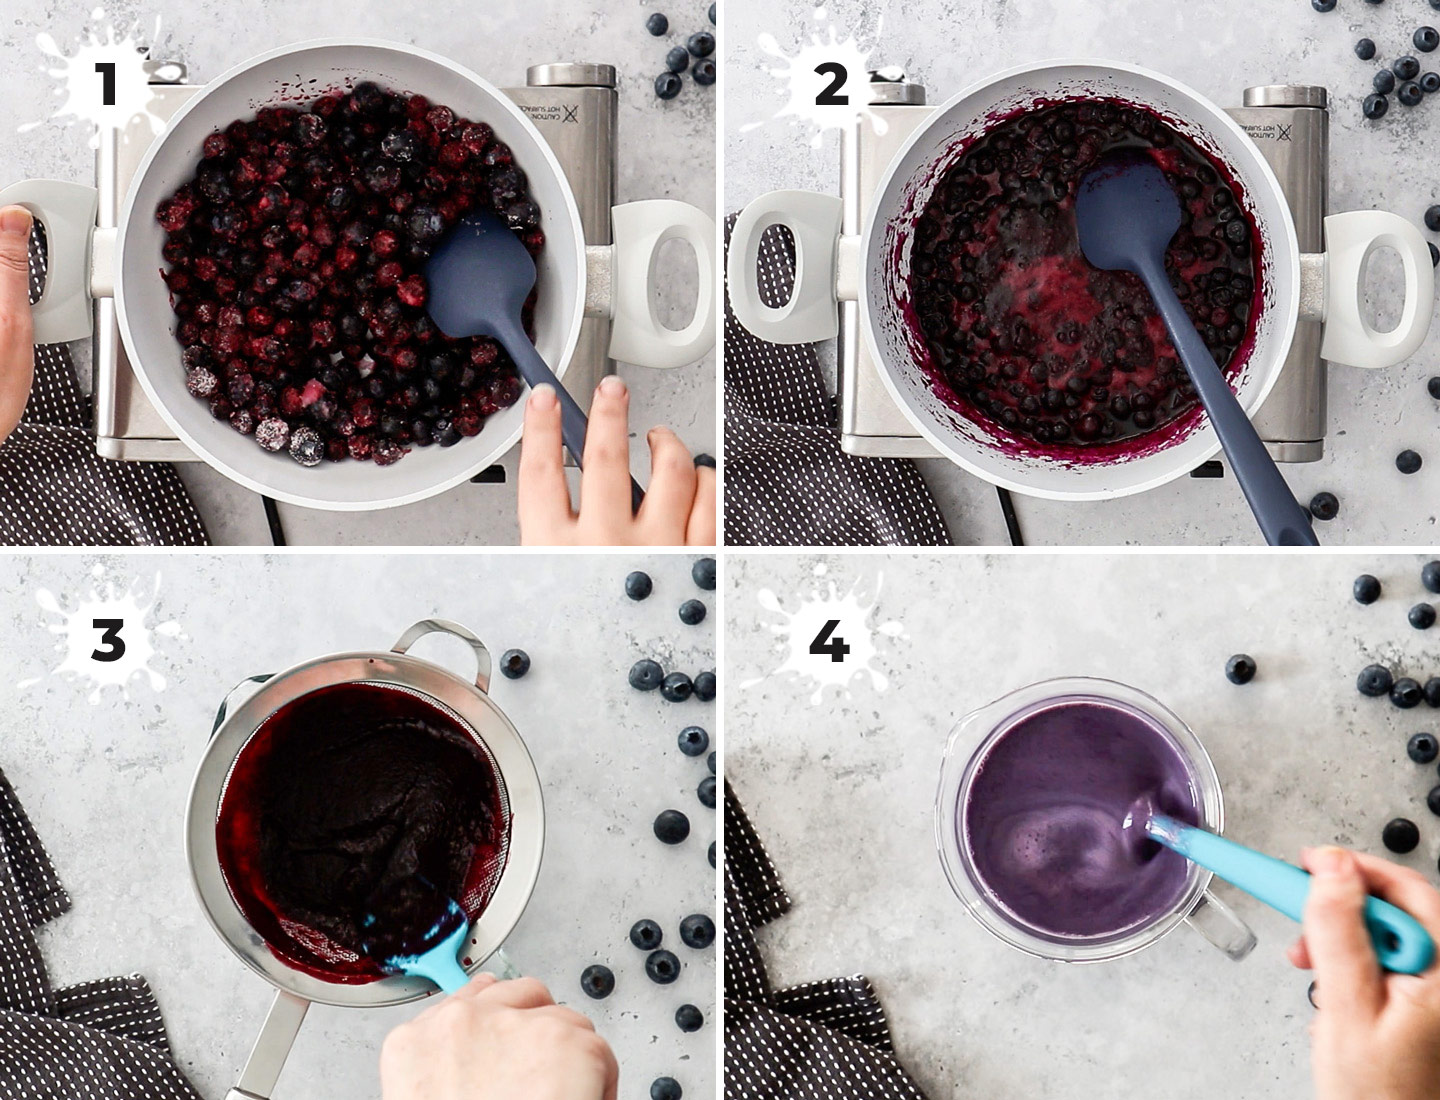 A collage showing how to make blueberry milk.